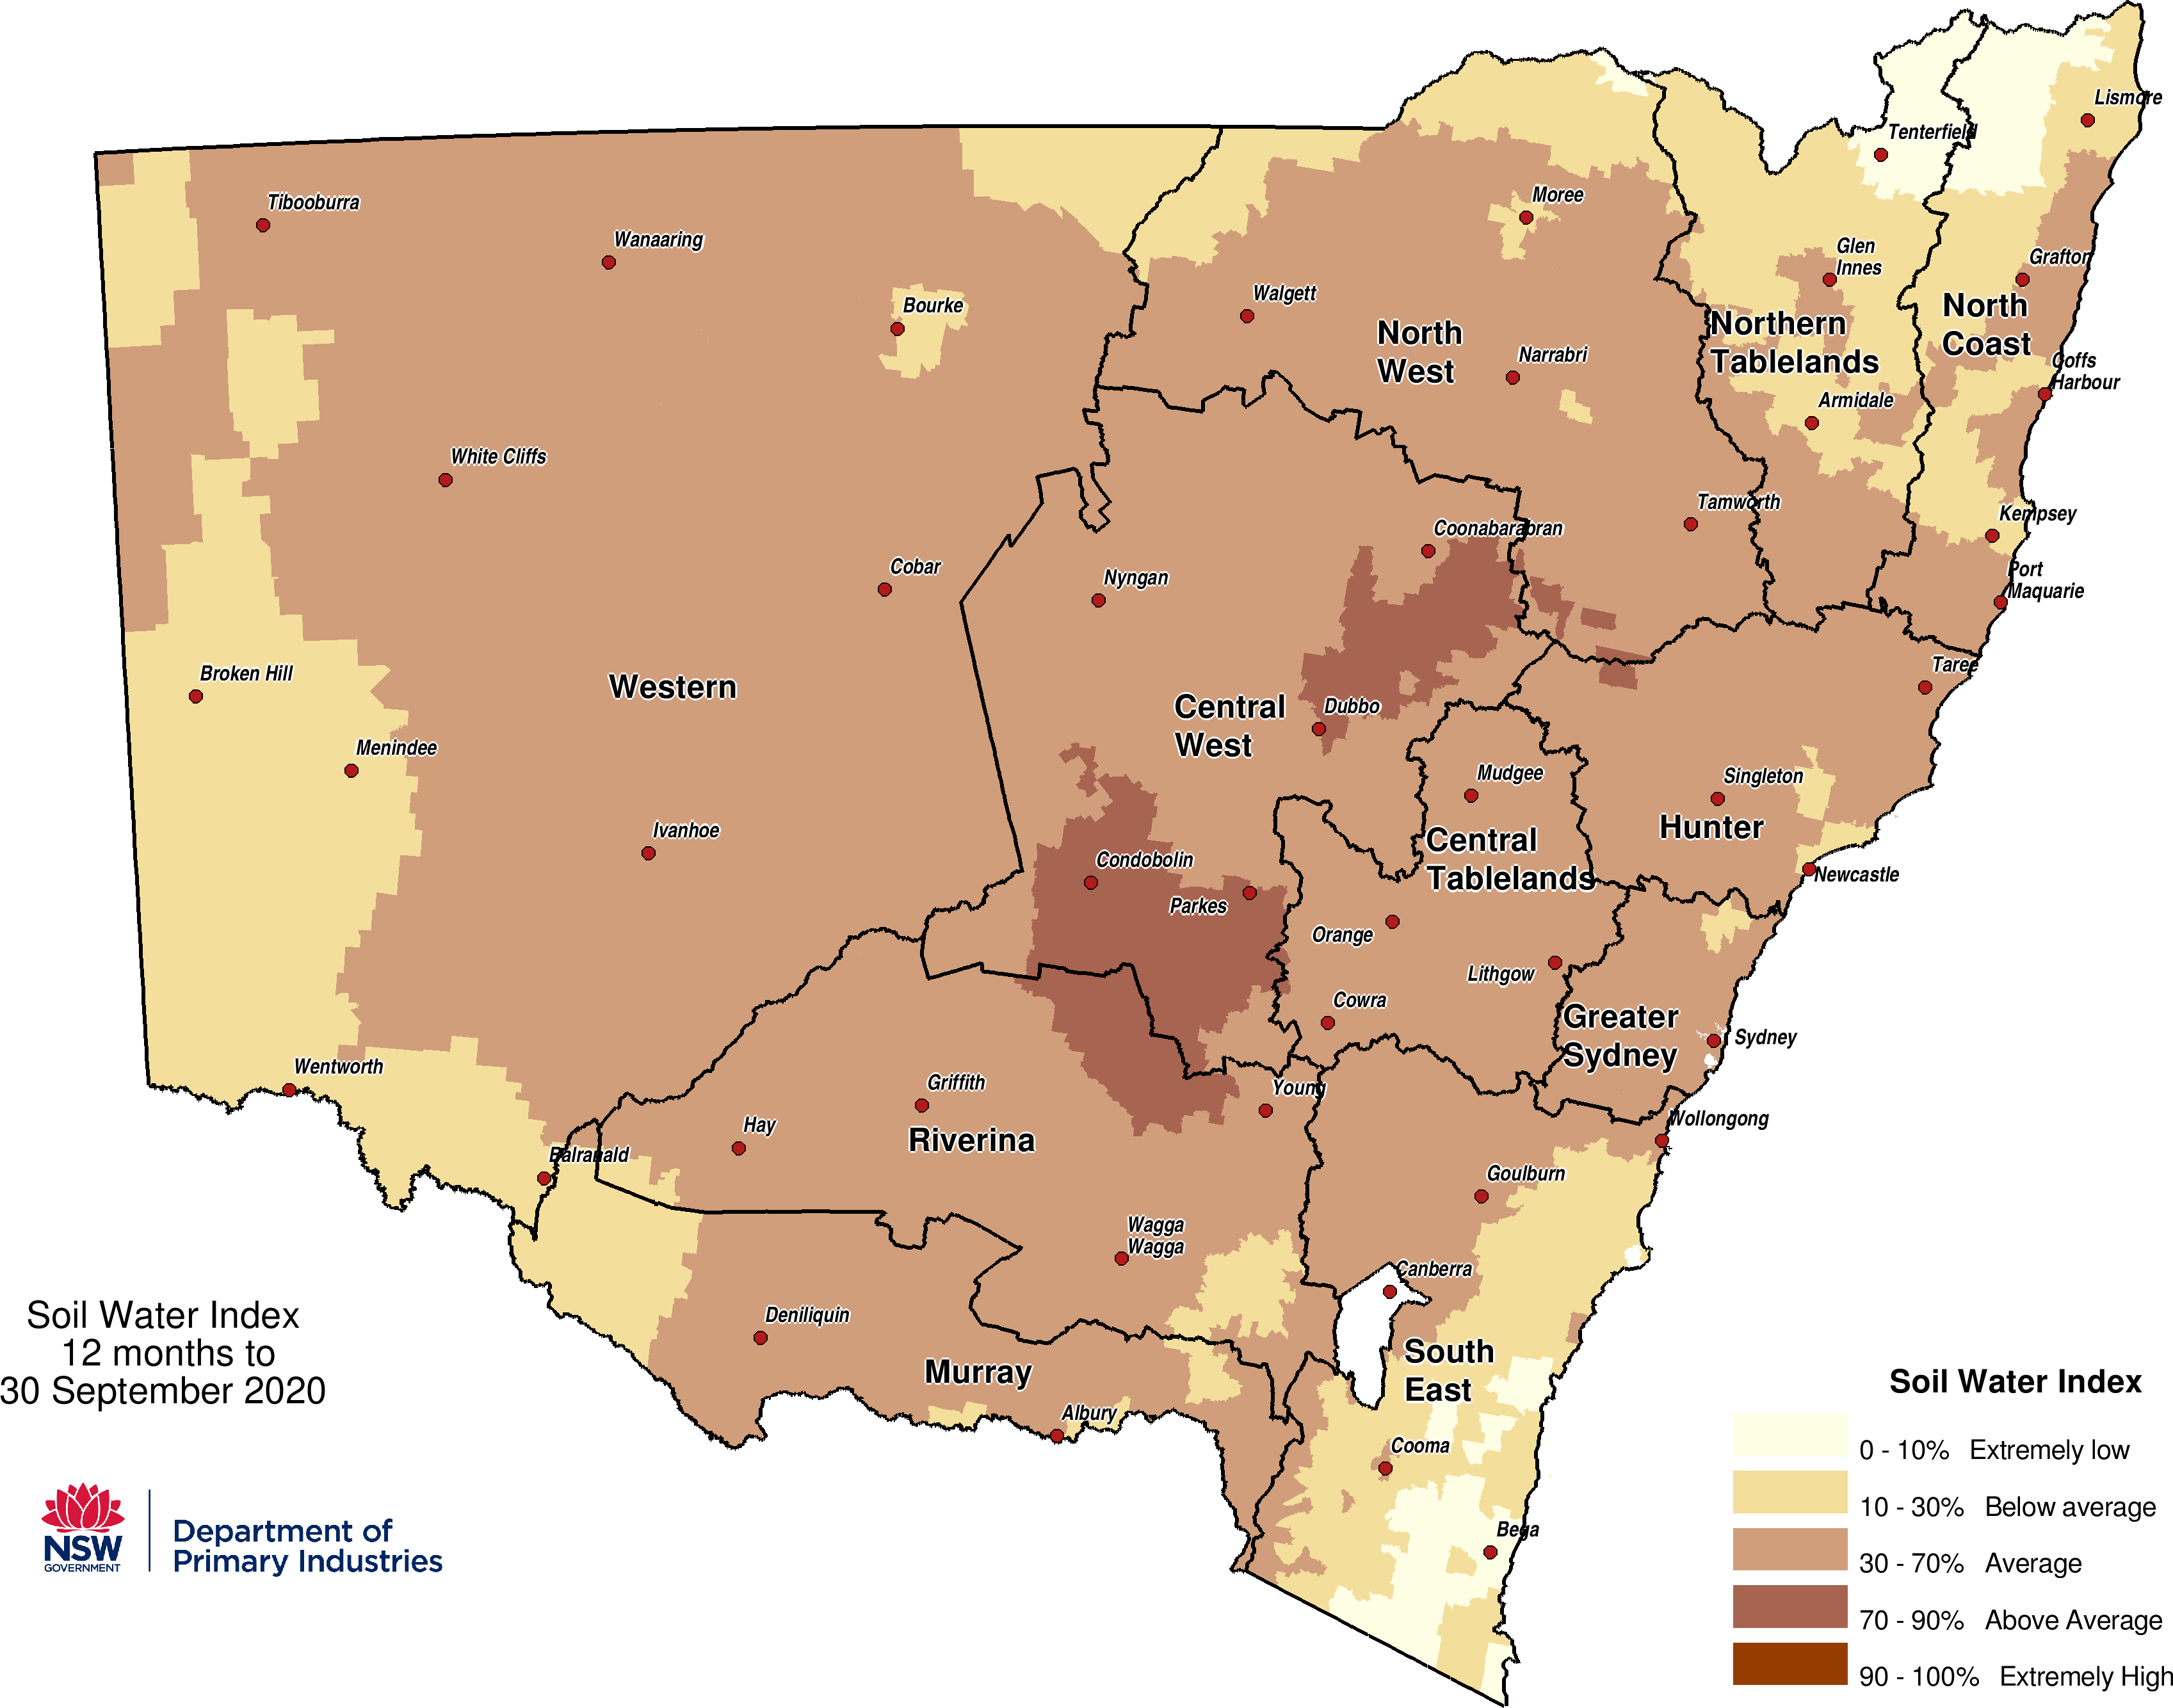 For an accessible explanation of this map contact the author scott.wallace@dpi.nsw.gov.au